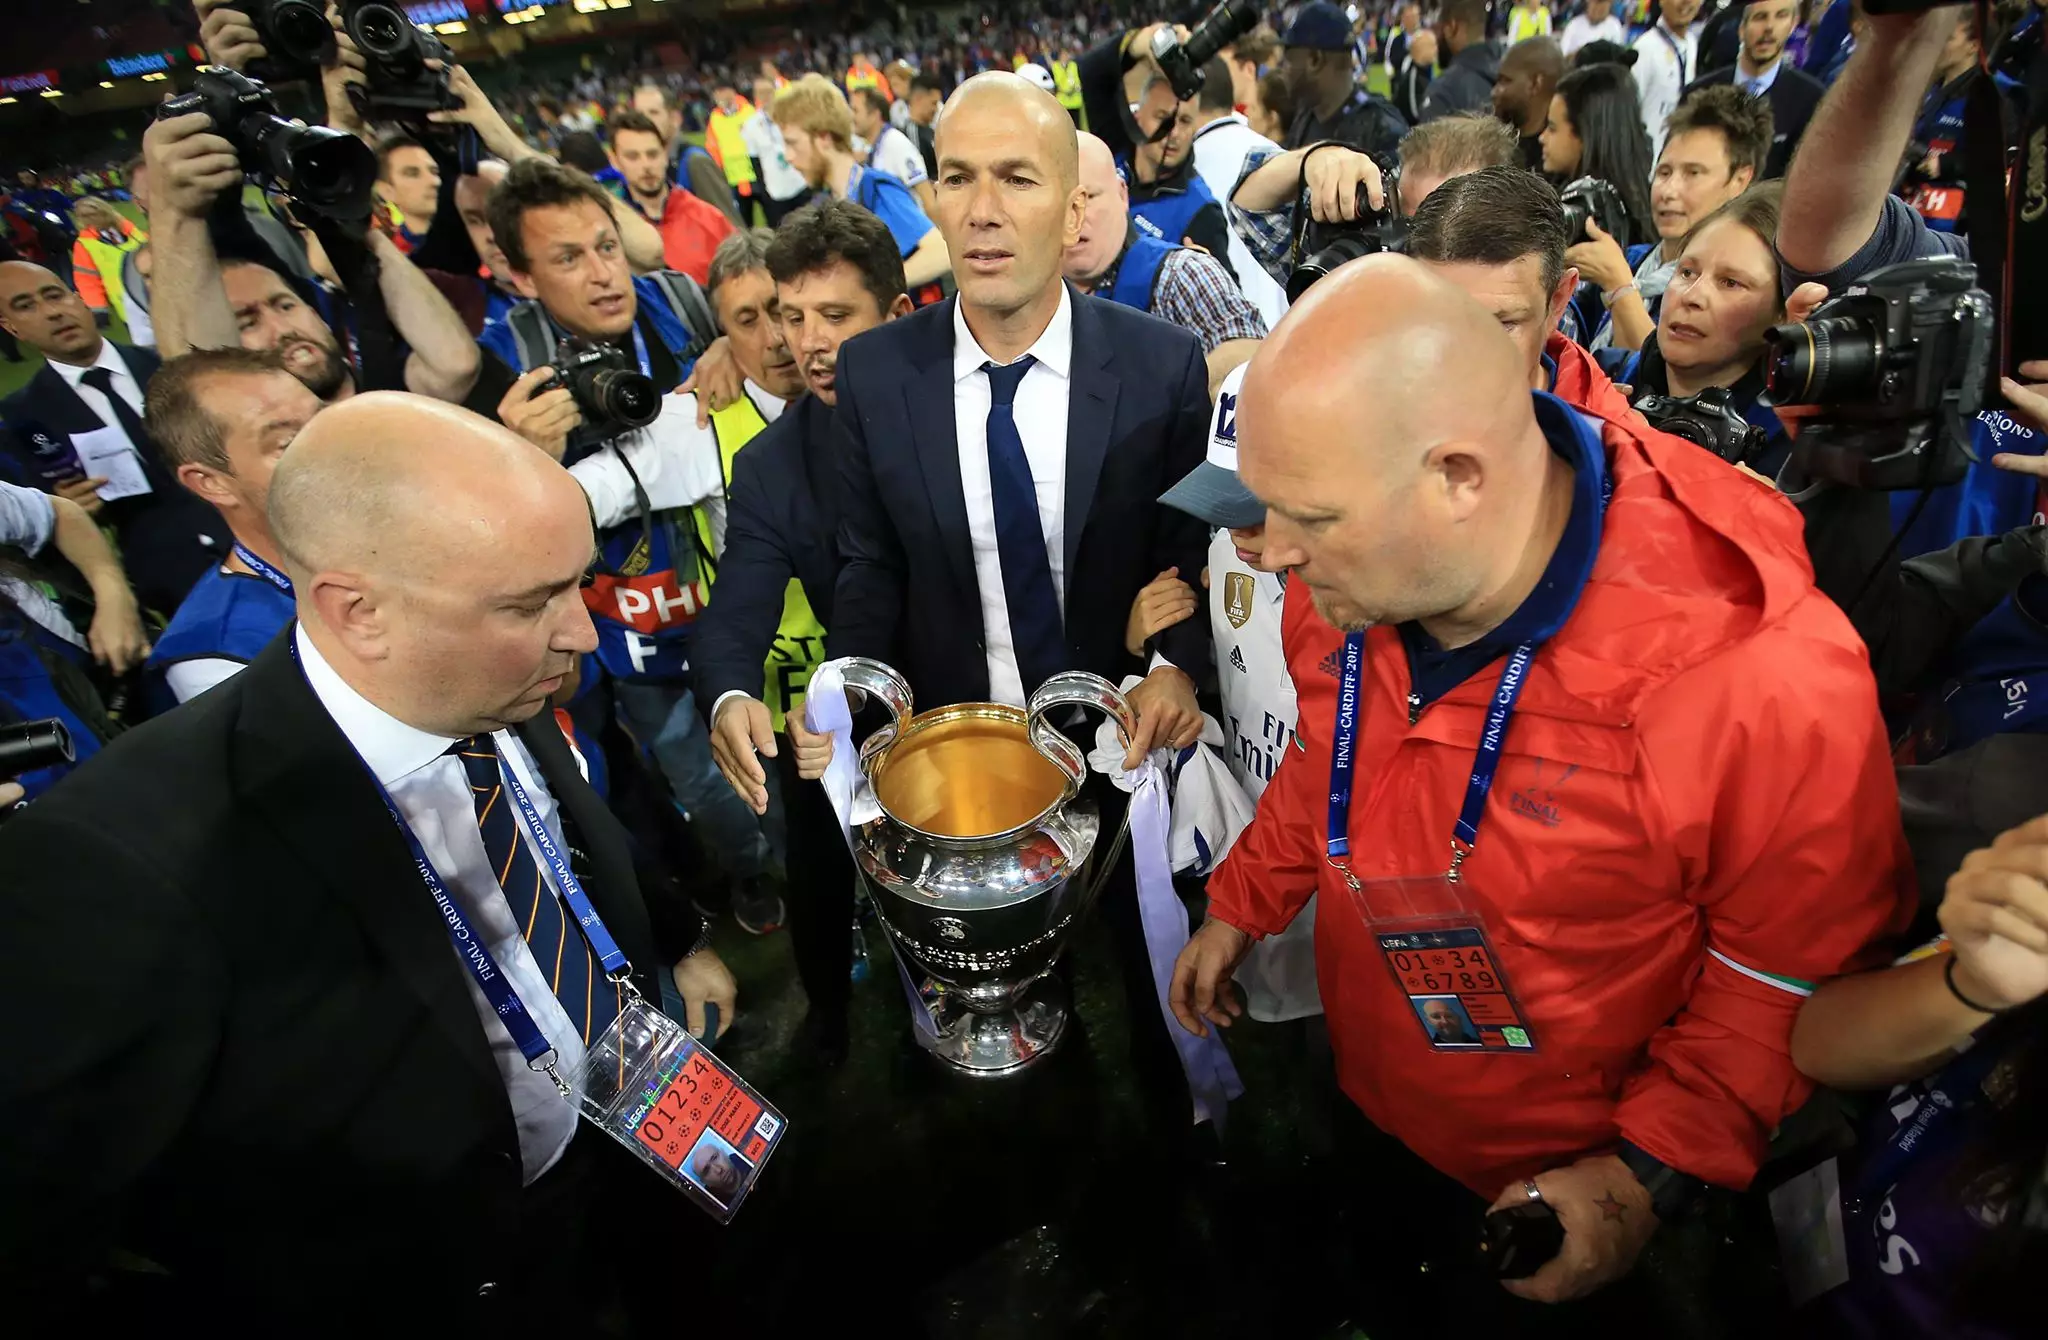 Zidane celebrates with the cup. Image: PA